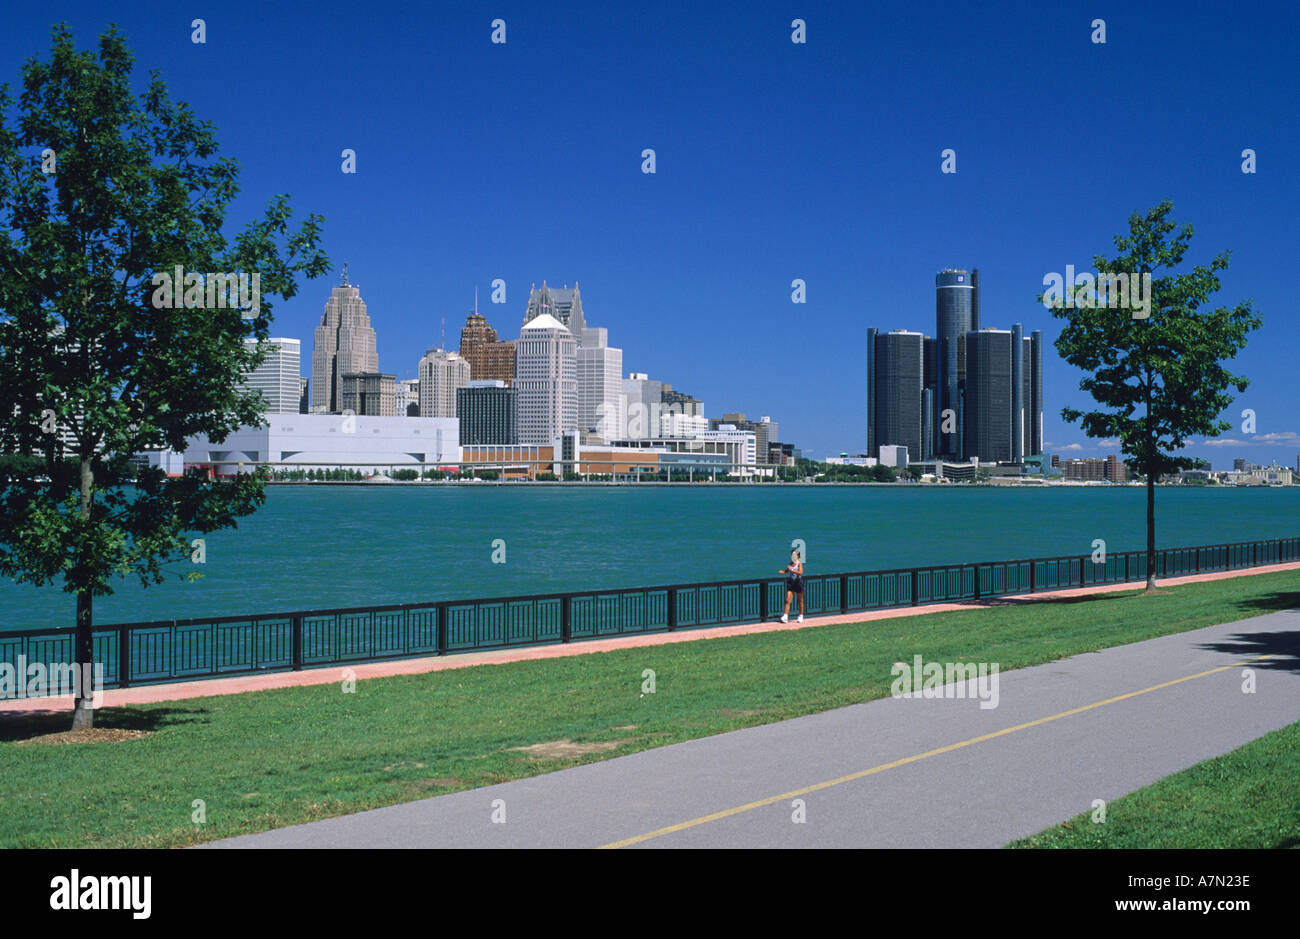 A view of the Detroit Michigan skyline taken from Windsor Ontario Canada with the Detroit river in the foreground  Stock Photo